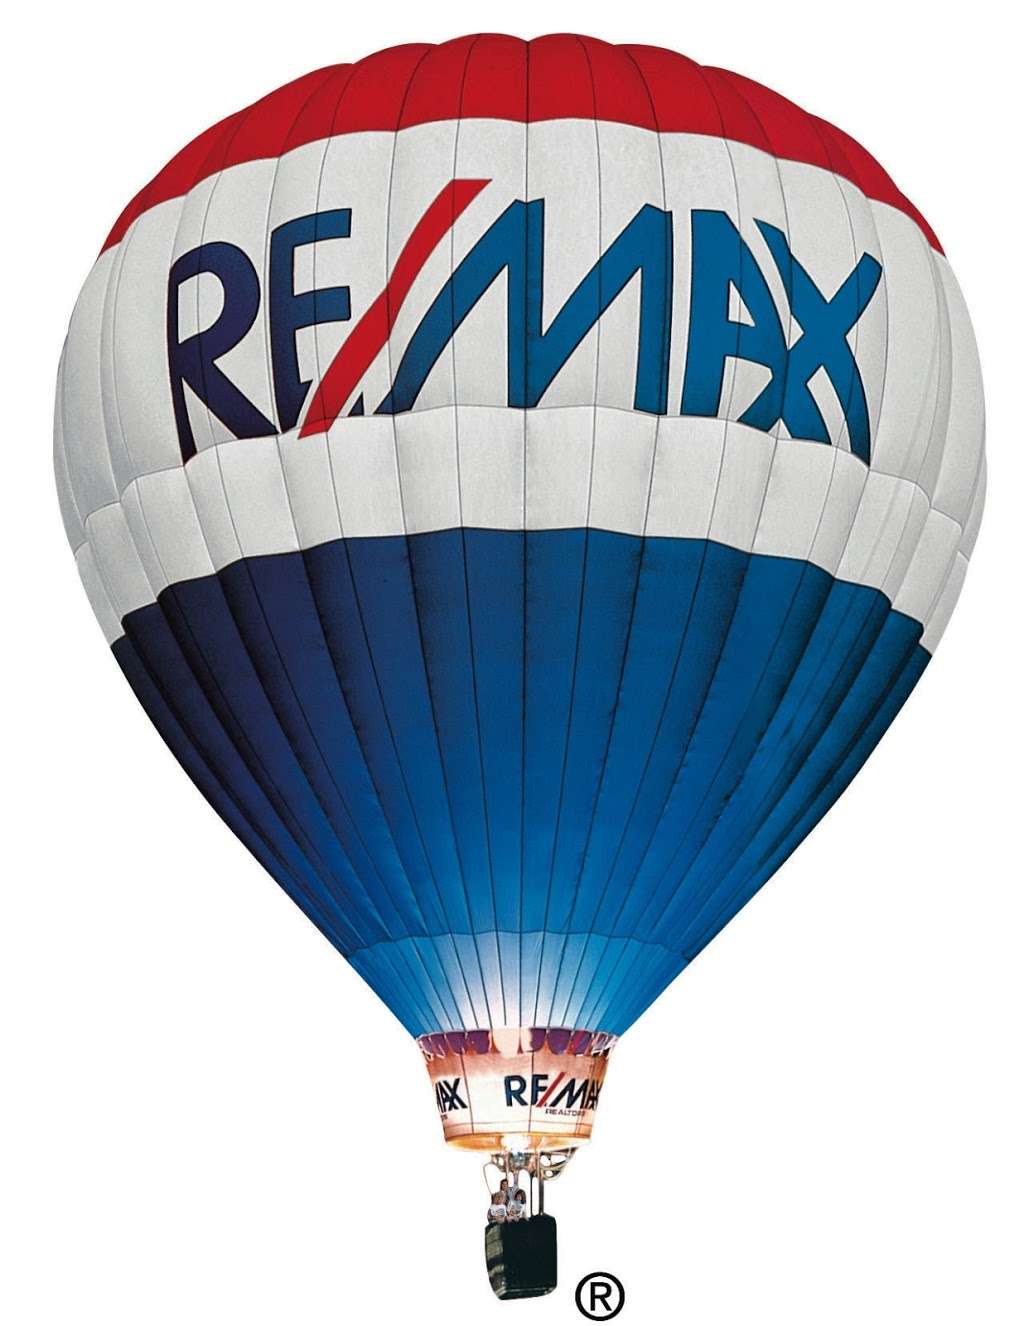 REMAX Renaissance | 4 Lowell Rd #5, North Reading, MA 01864 | Phone: (978) 664-3000